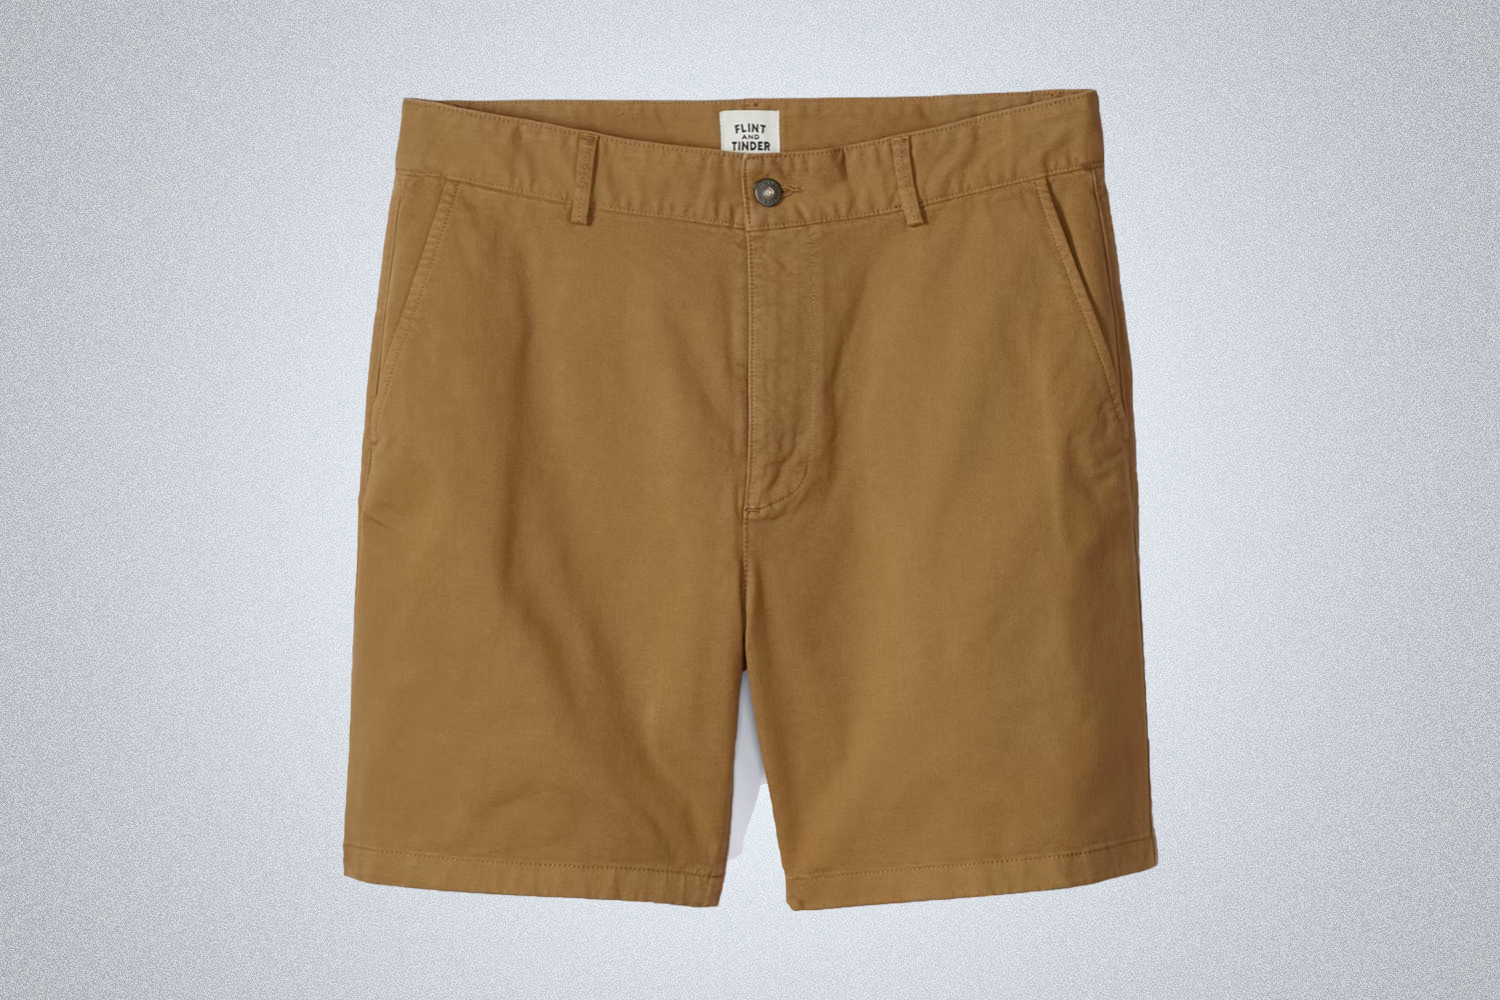 a pair of tan 7" chino shorts from Flint and Tinder on a grey background